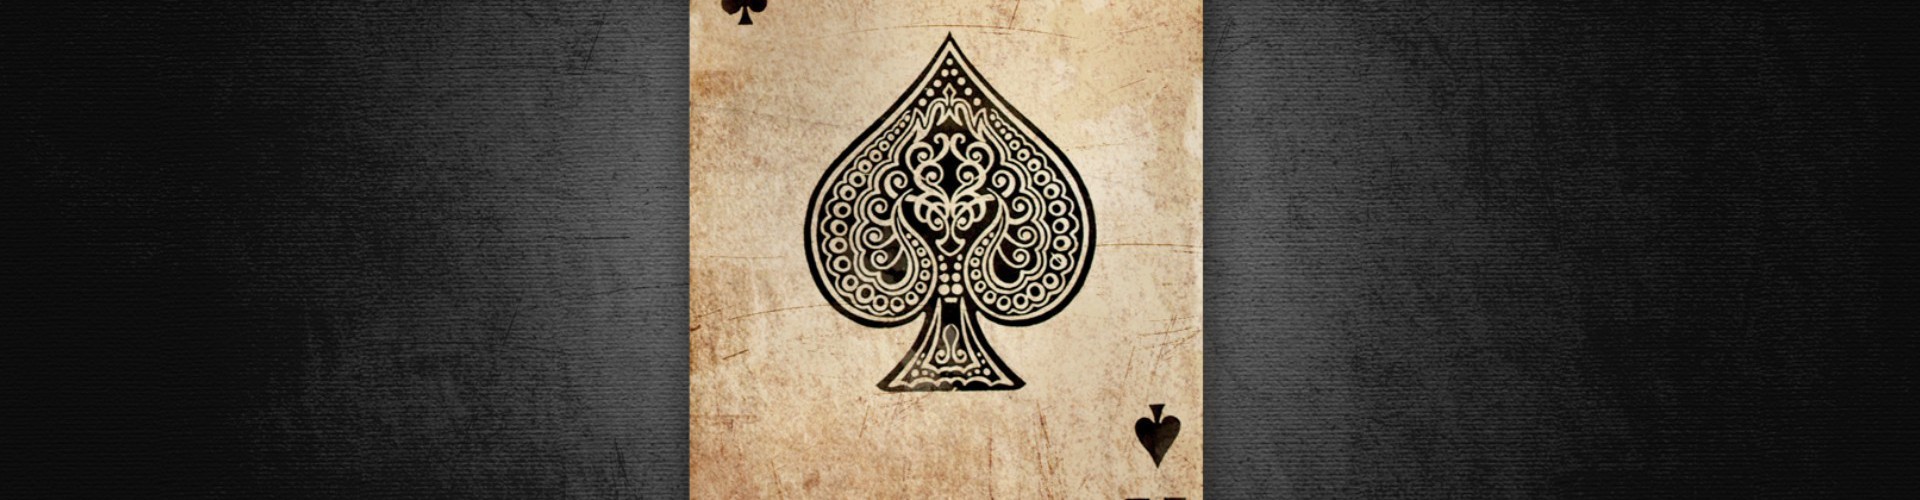 Free download Ace of Spades Wallpaper by exoticdezines [1131x707] for